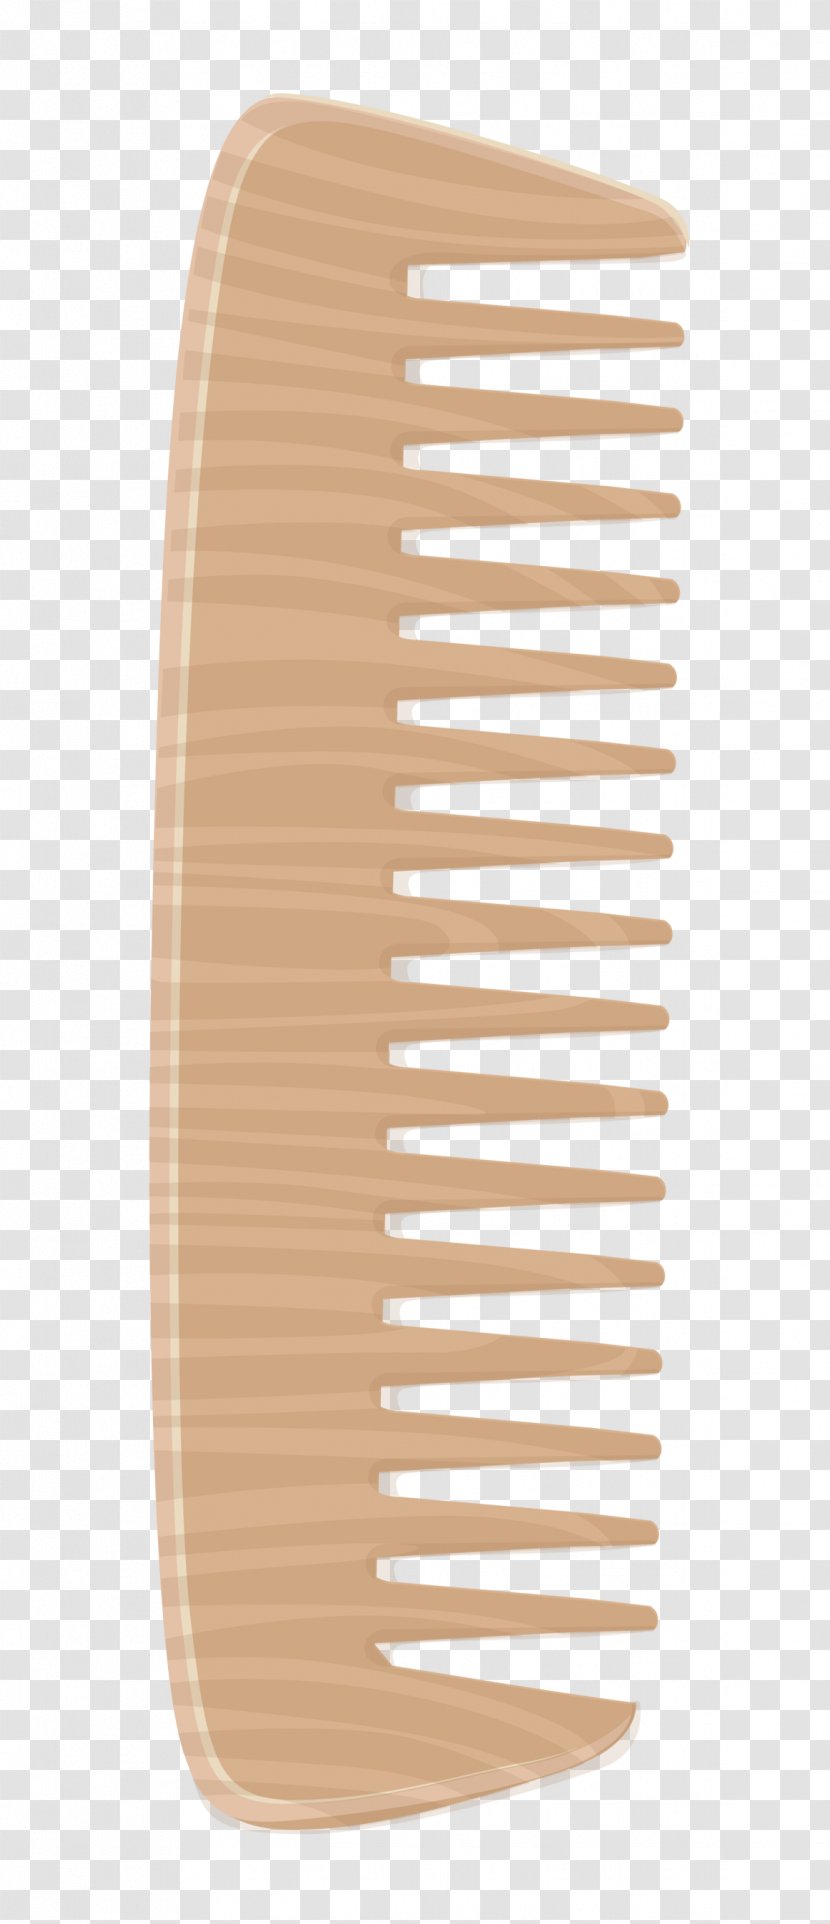 Comb Hairbrush Clip Art - Hairdresser - Cliparts Transparent PNG